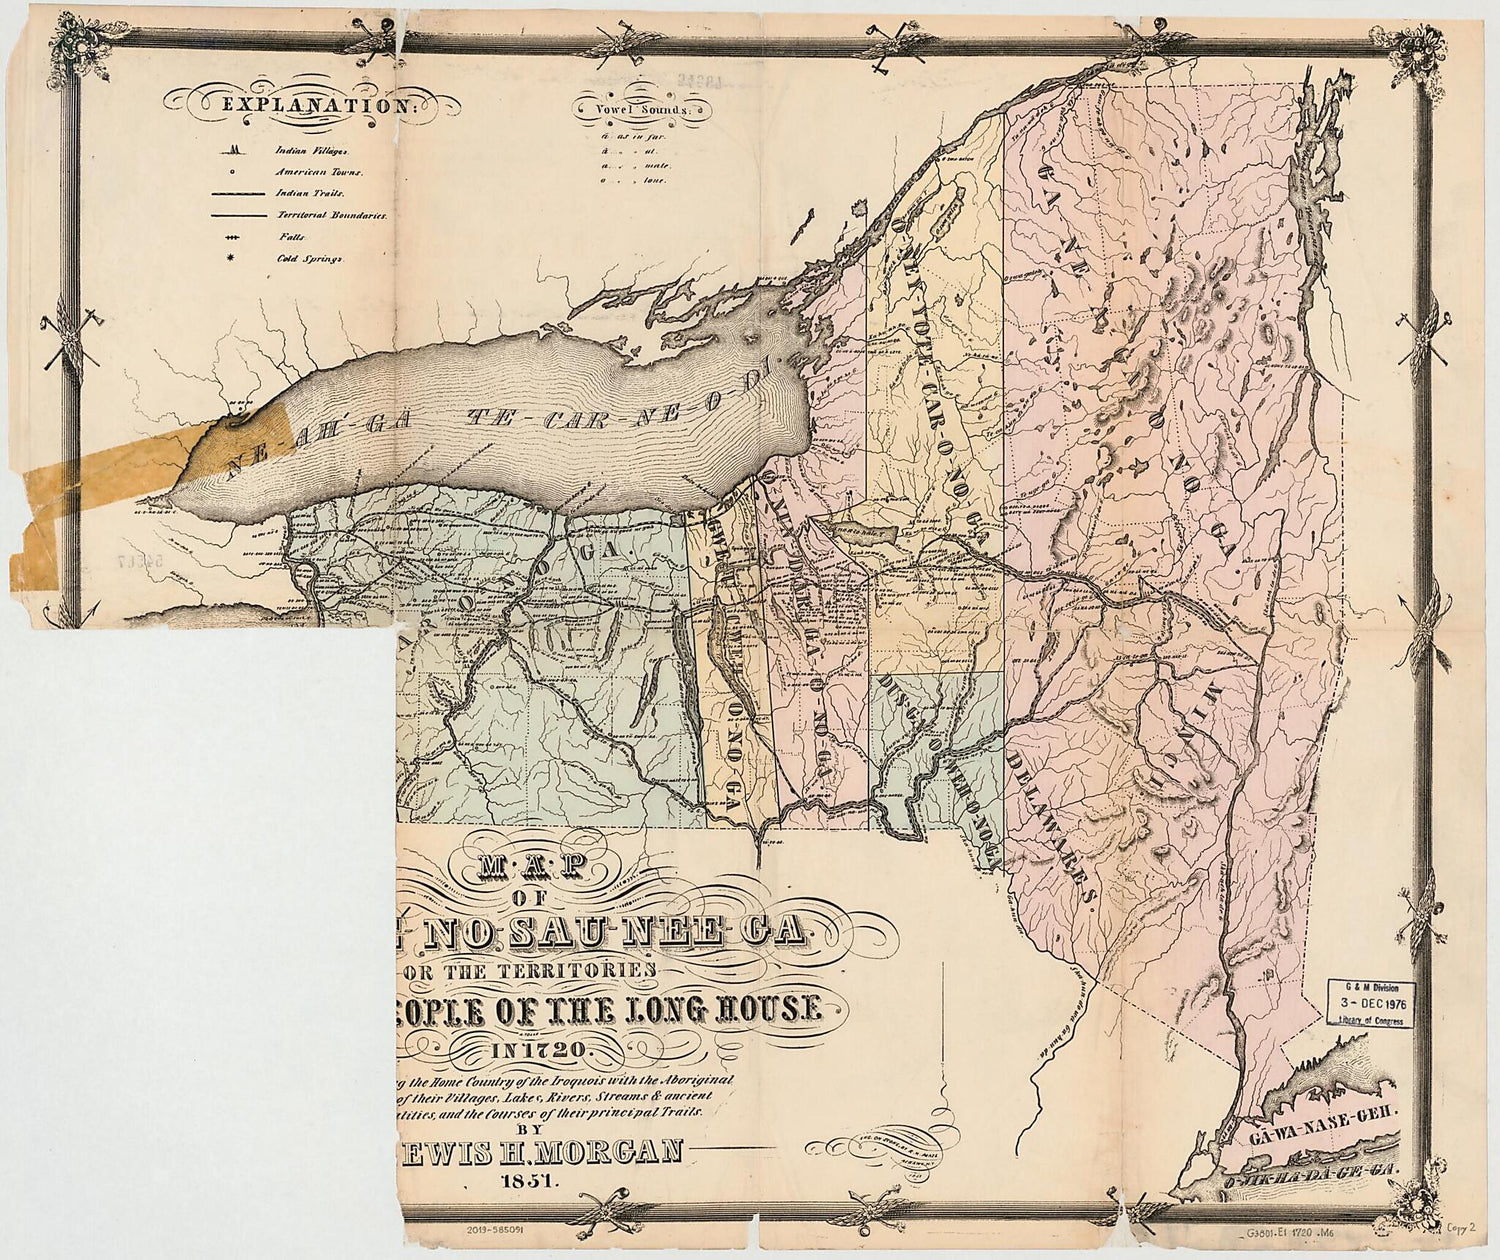 This old map of De-No-Sau-Nee-Ga : Or the Territories of the People of the Long House In from 1720 : Exhibiting the Home Country of the Iroquois With the Aboriginal Names of Their Villages, Lakes, Rivers, Streams &amp; Ancient Localities, and the Courses of 